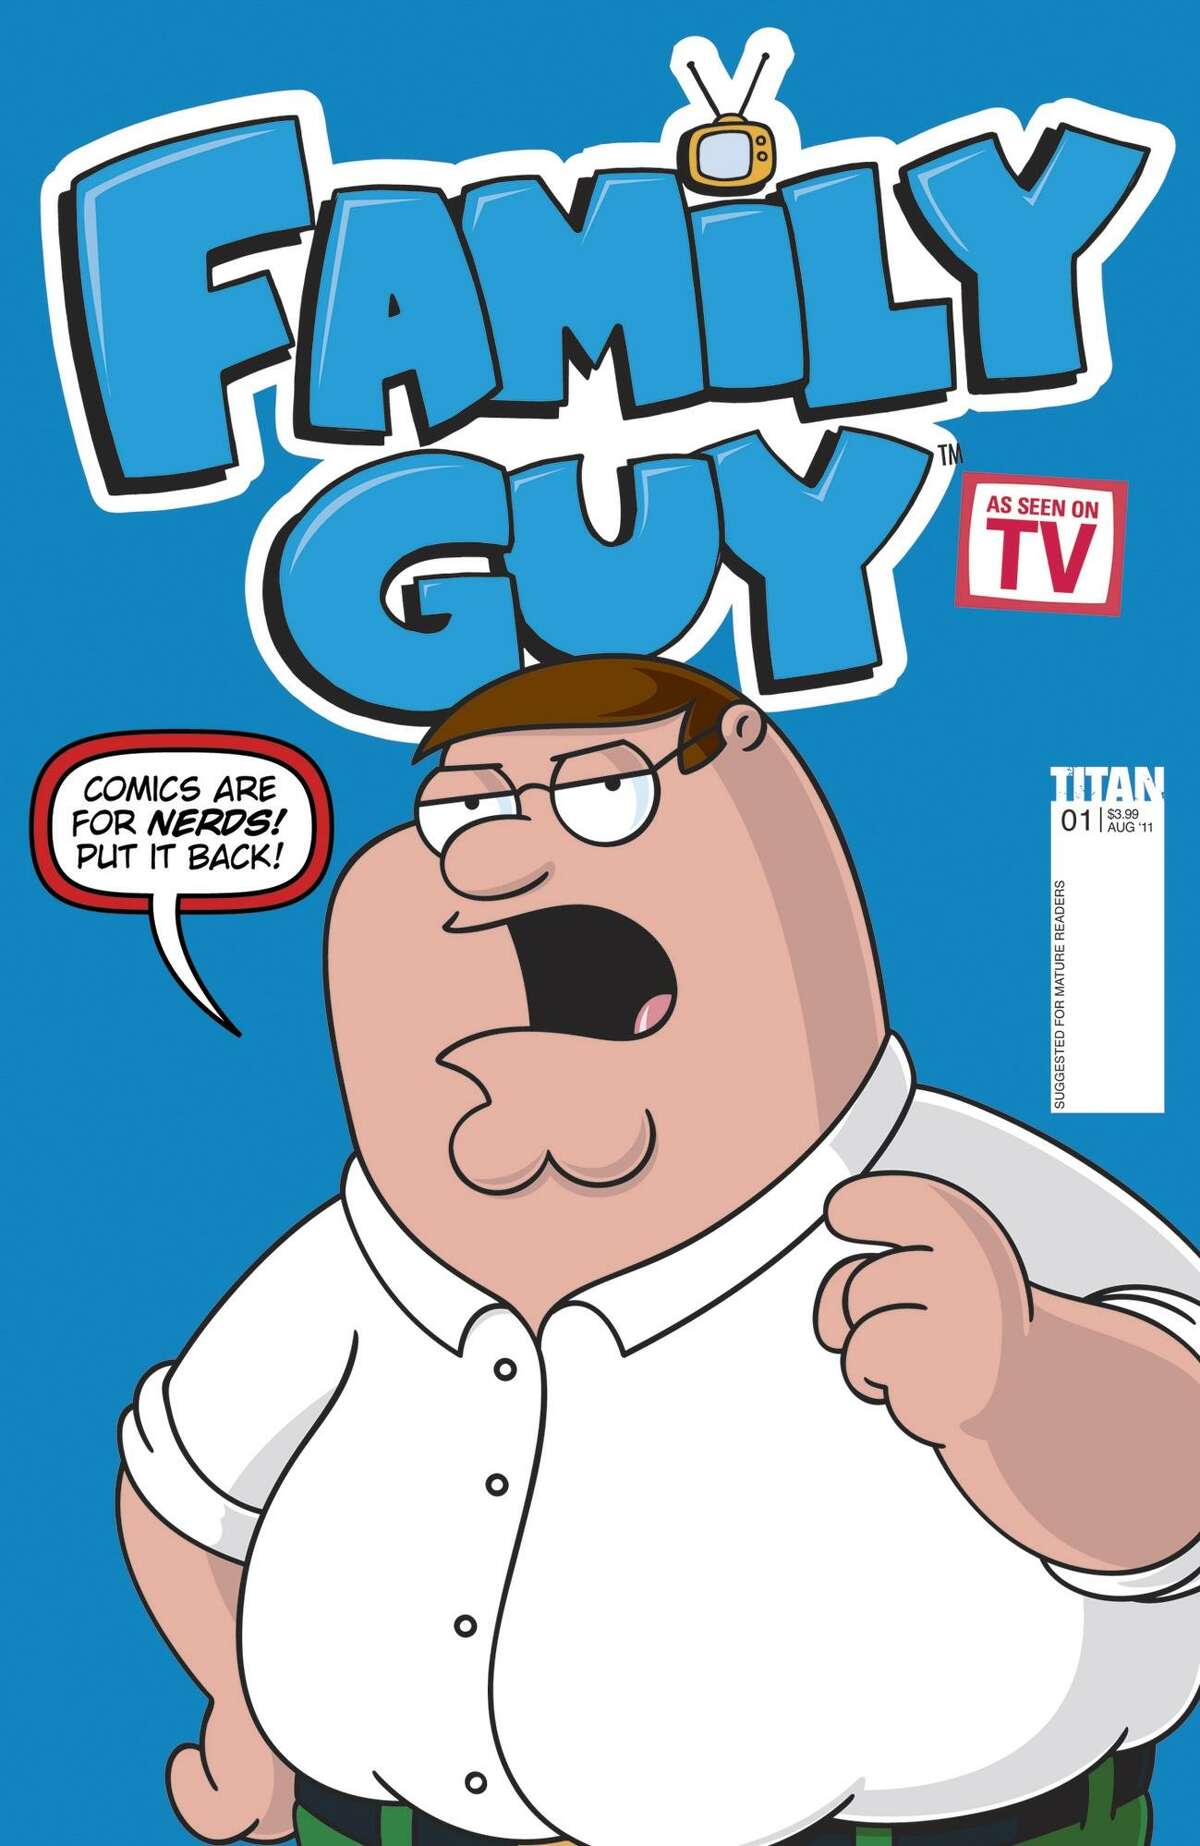 In this comic book cover image released by Titan Comics, animated Peter Griffin from the animated series, "Family Guy," is shown on the cover of the upcoming "Family Guy" comic book available July 27, 2011 in comic book shops and on newsstands. (AP Photo/Titan Comics)